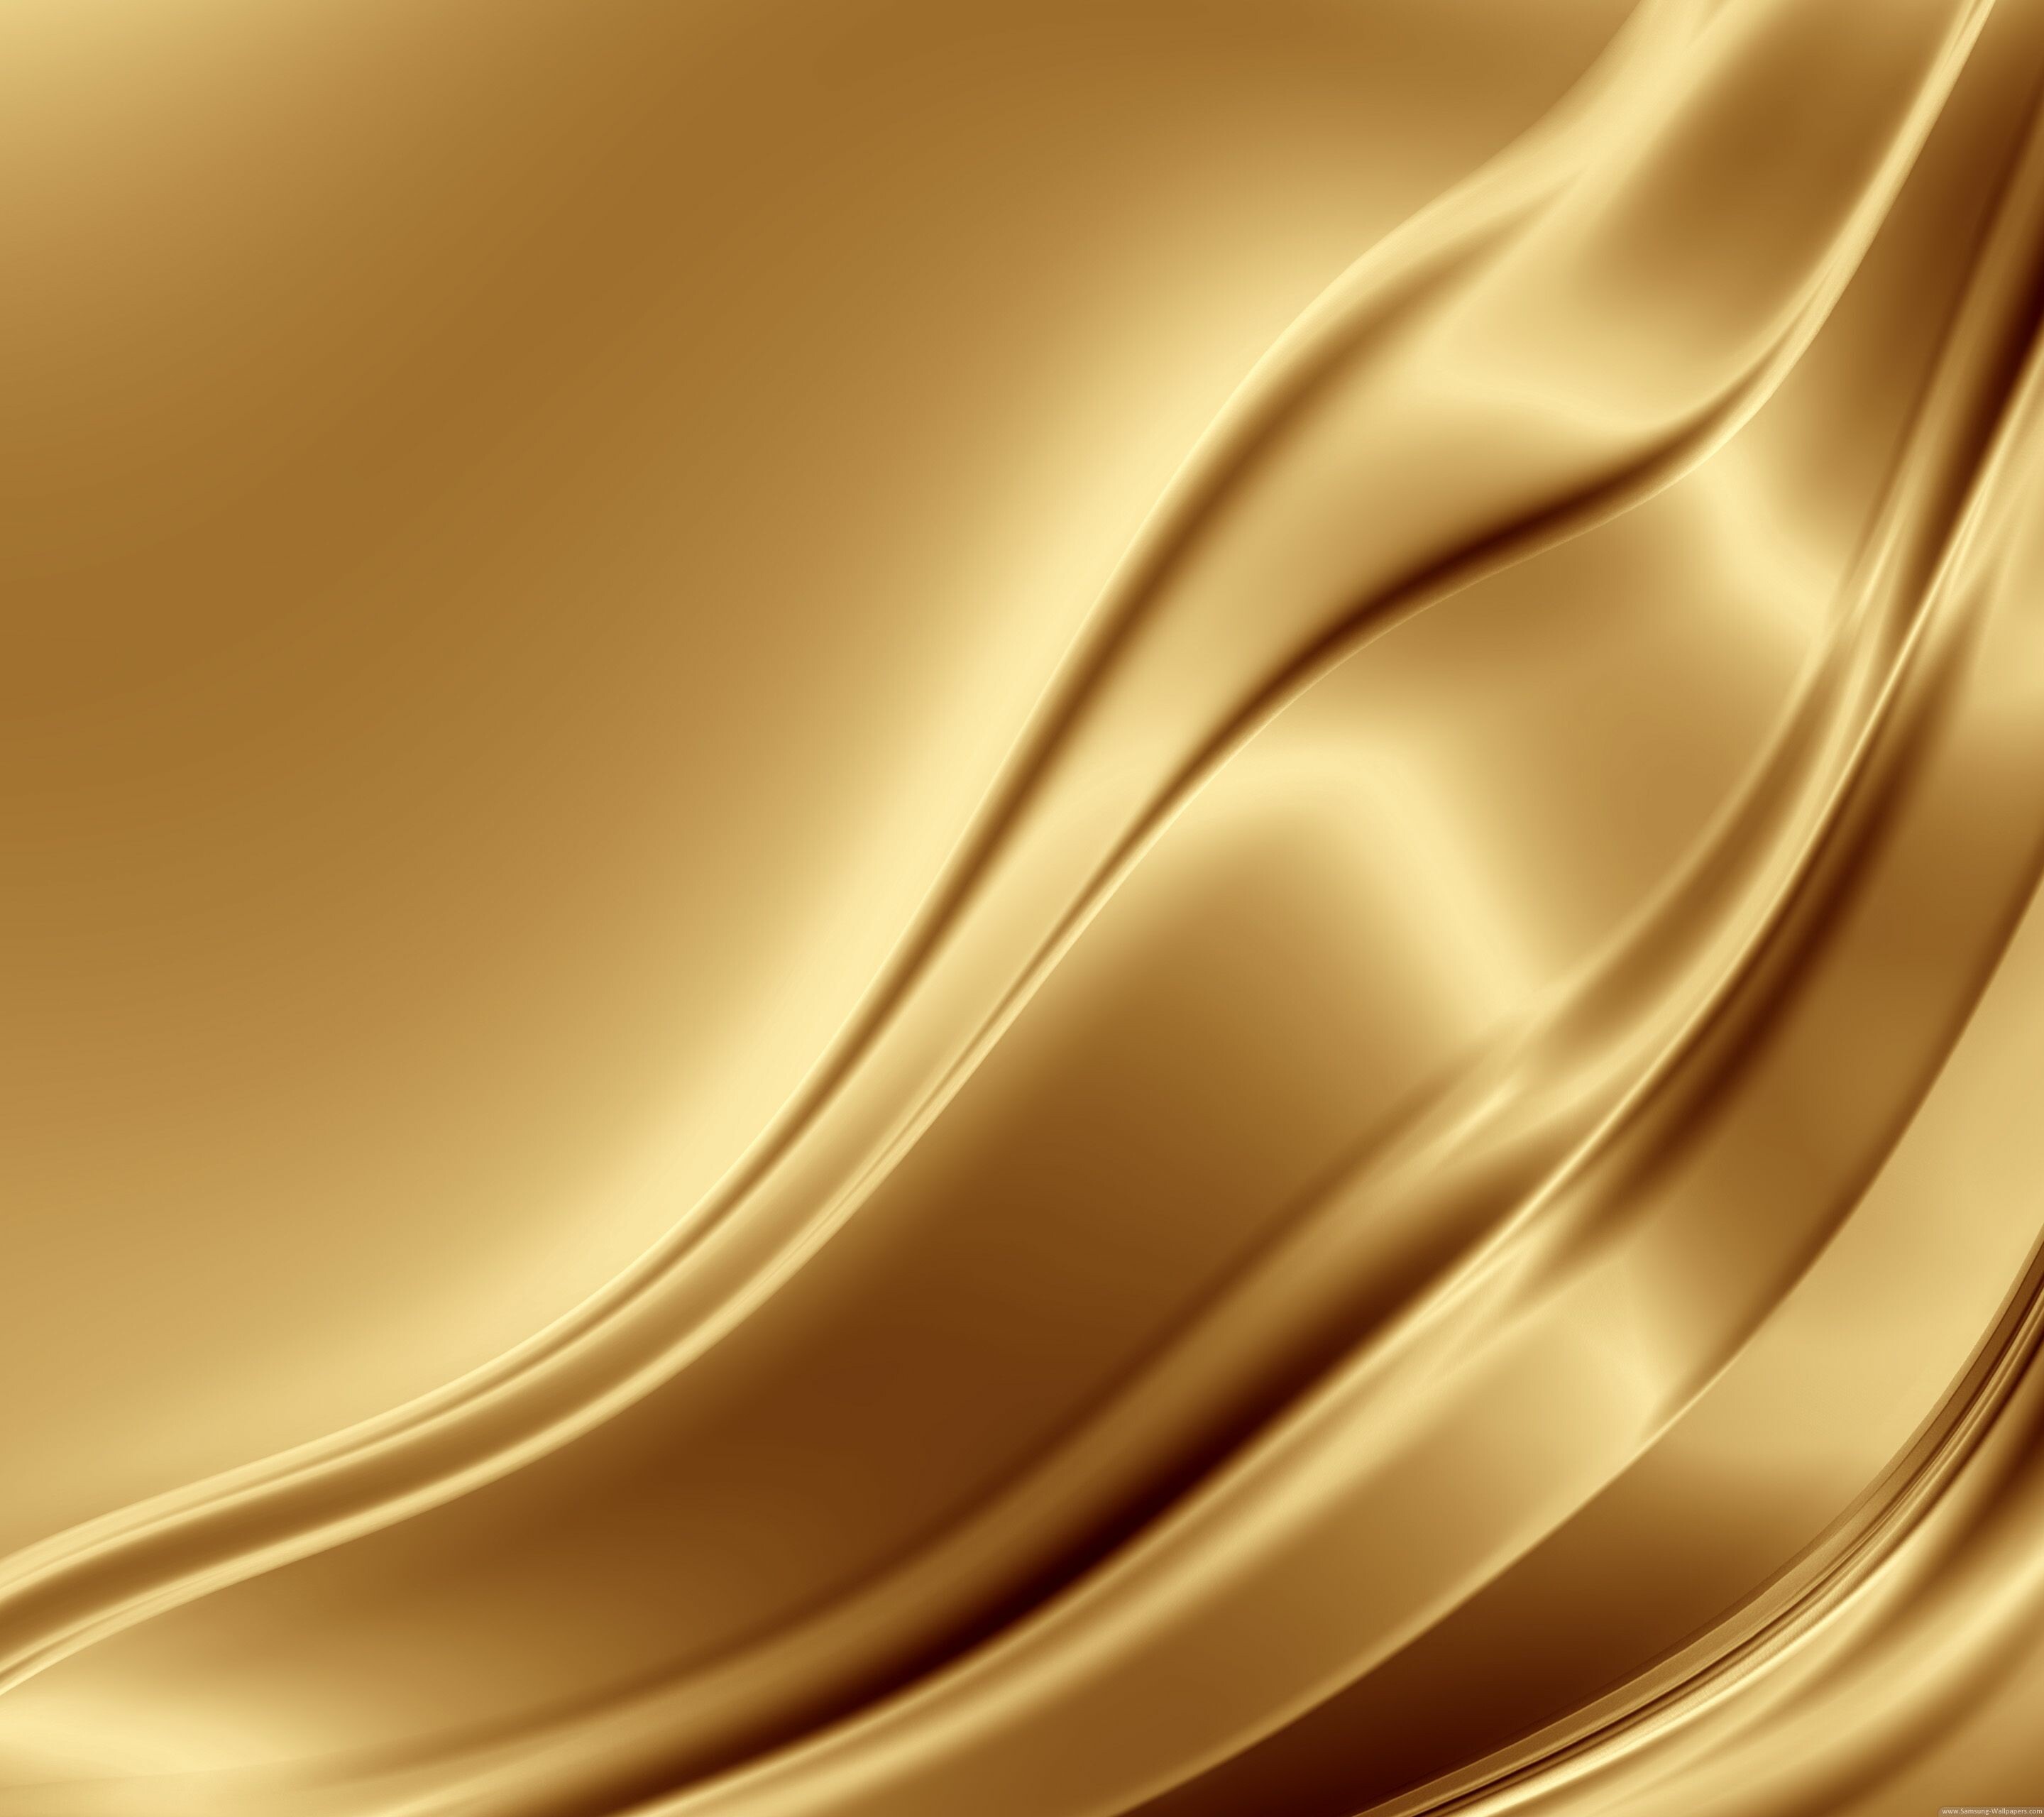 57+ Golden Wallpapers: HD, 4K, 5K for PC and Mobile | Download free images  for iPhone, Android